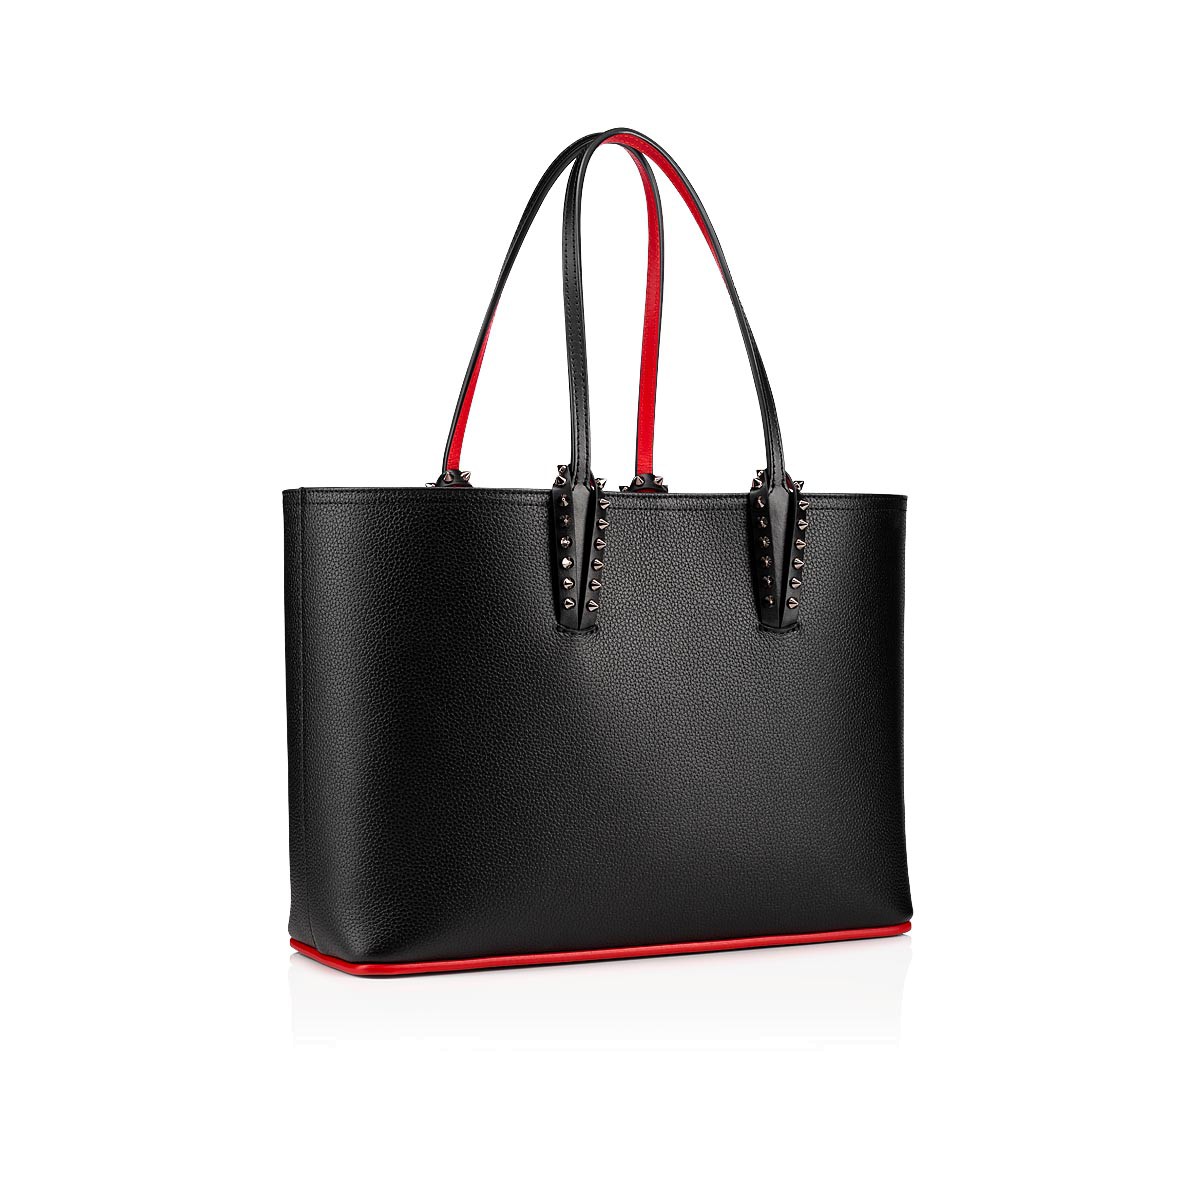 Paloma - Clutch - Grained calf leather and spikes Loubinthesky - Black -  Christian Louboutin United States